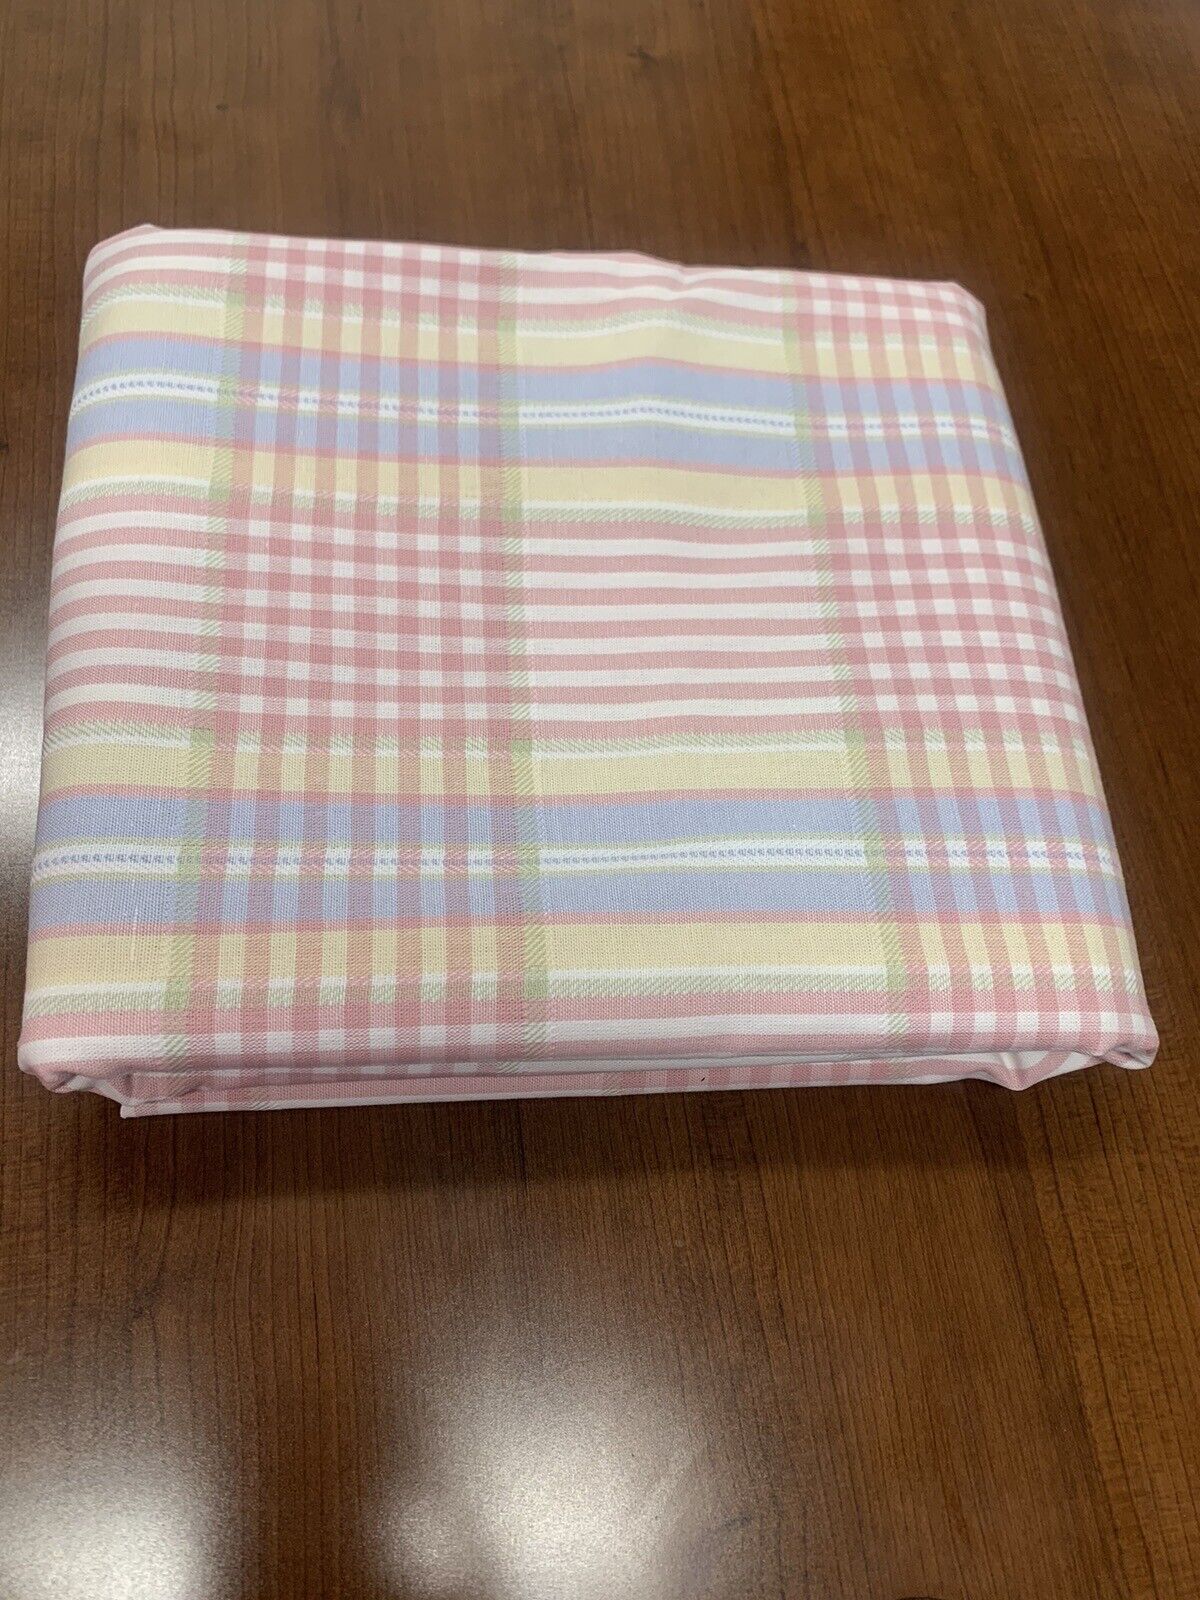 Vintage Pastel Plaid Cotton Blend Fabric 1 1/2 Yards 56 Inch Wide Material